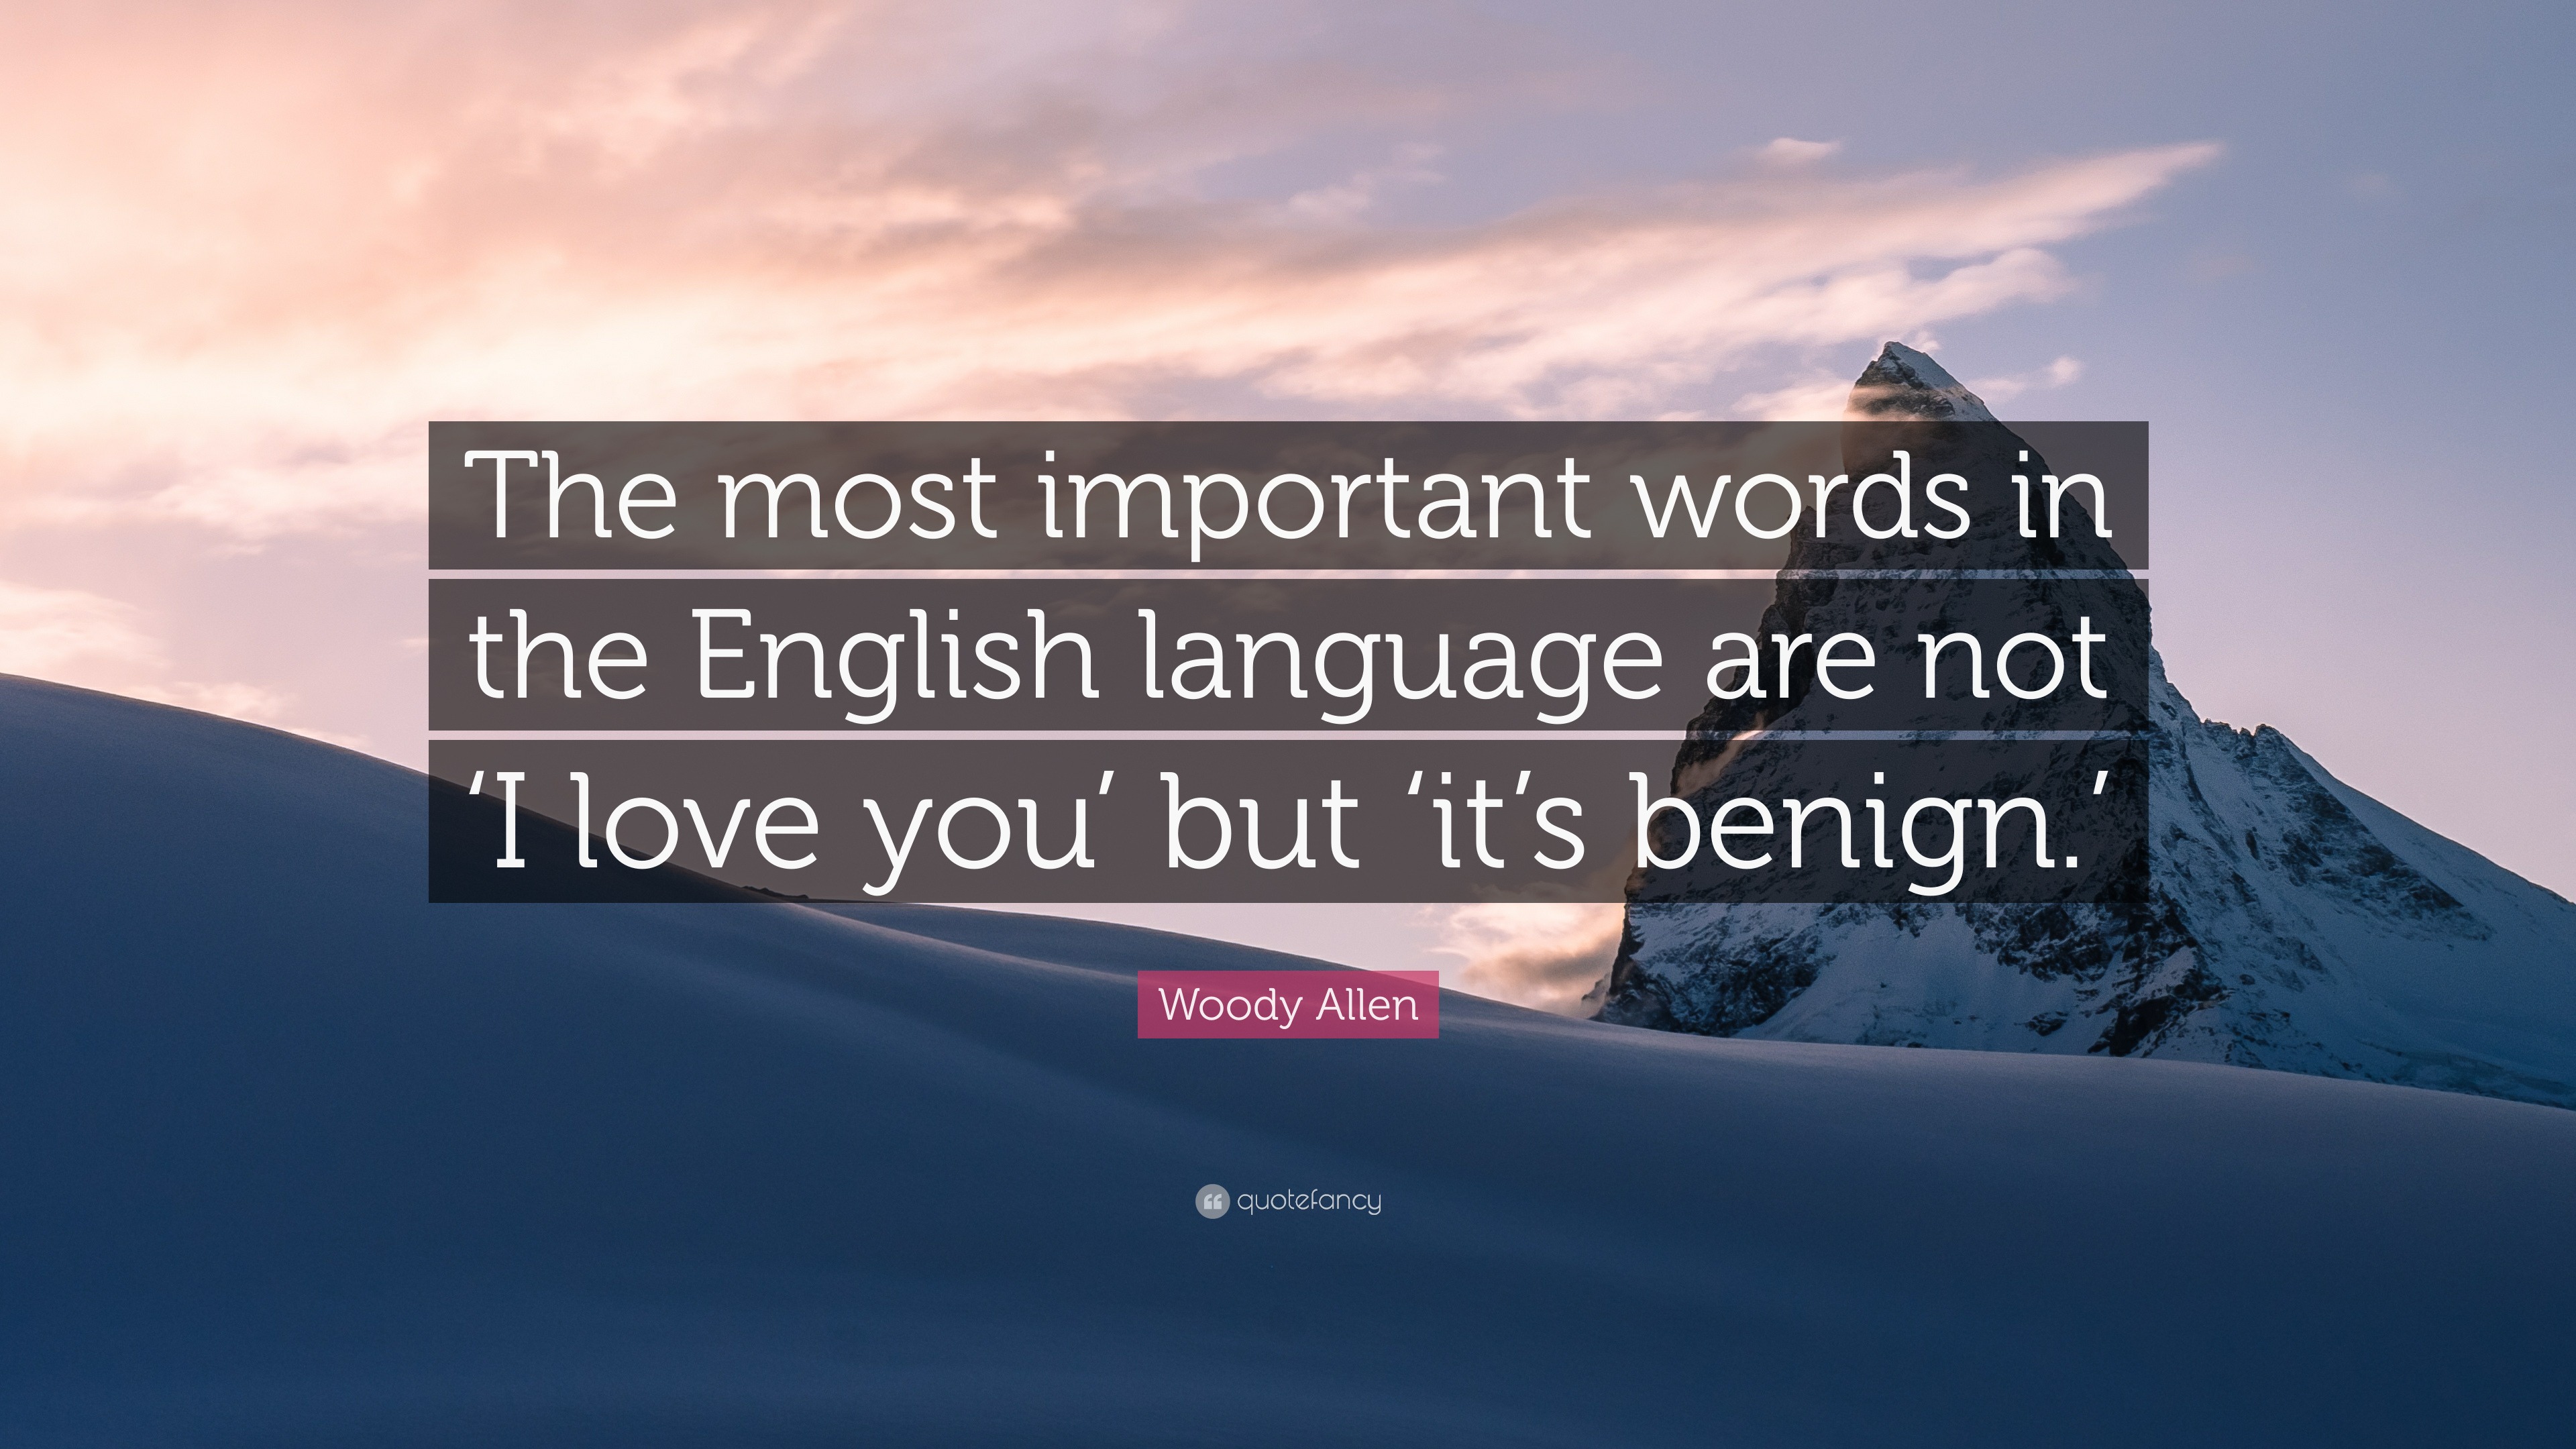 Woody Allen Quote: “The most important words in the English language ...